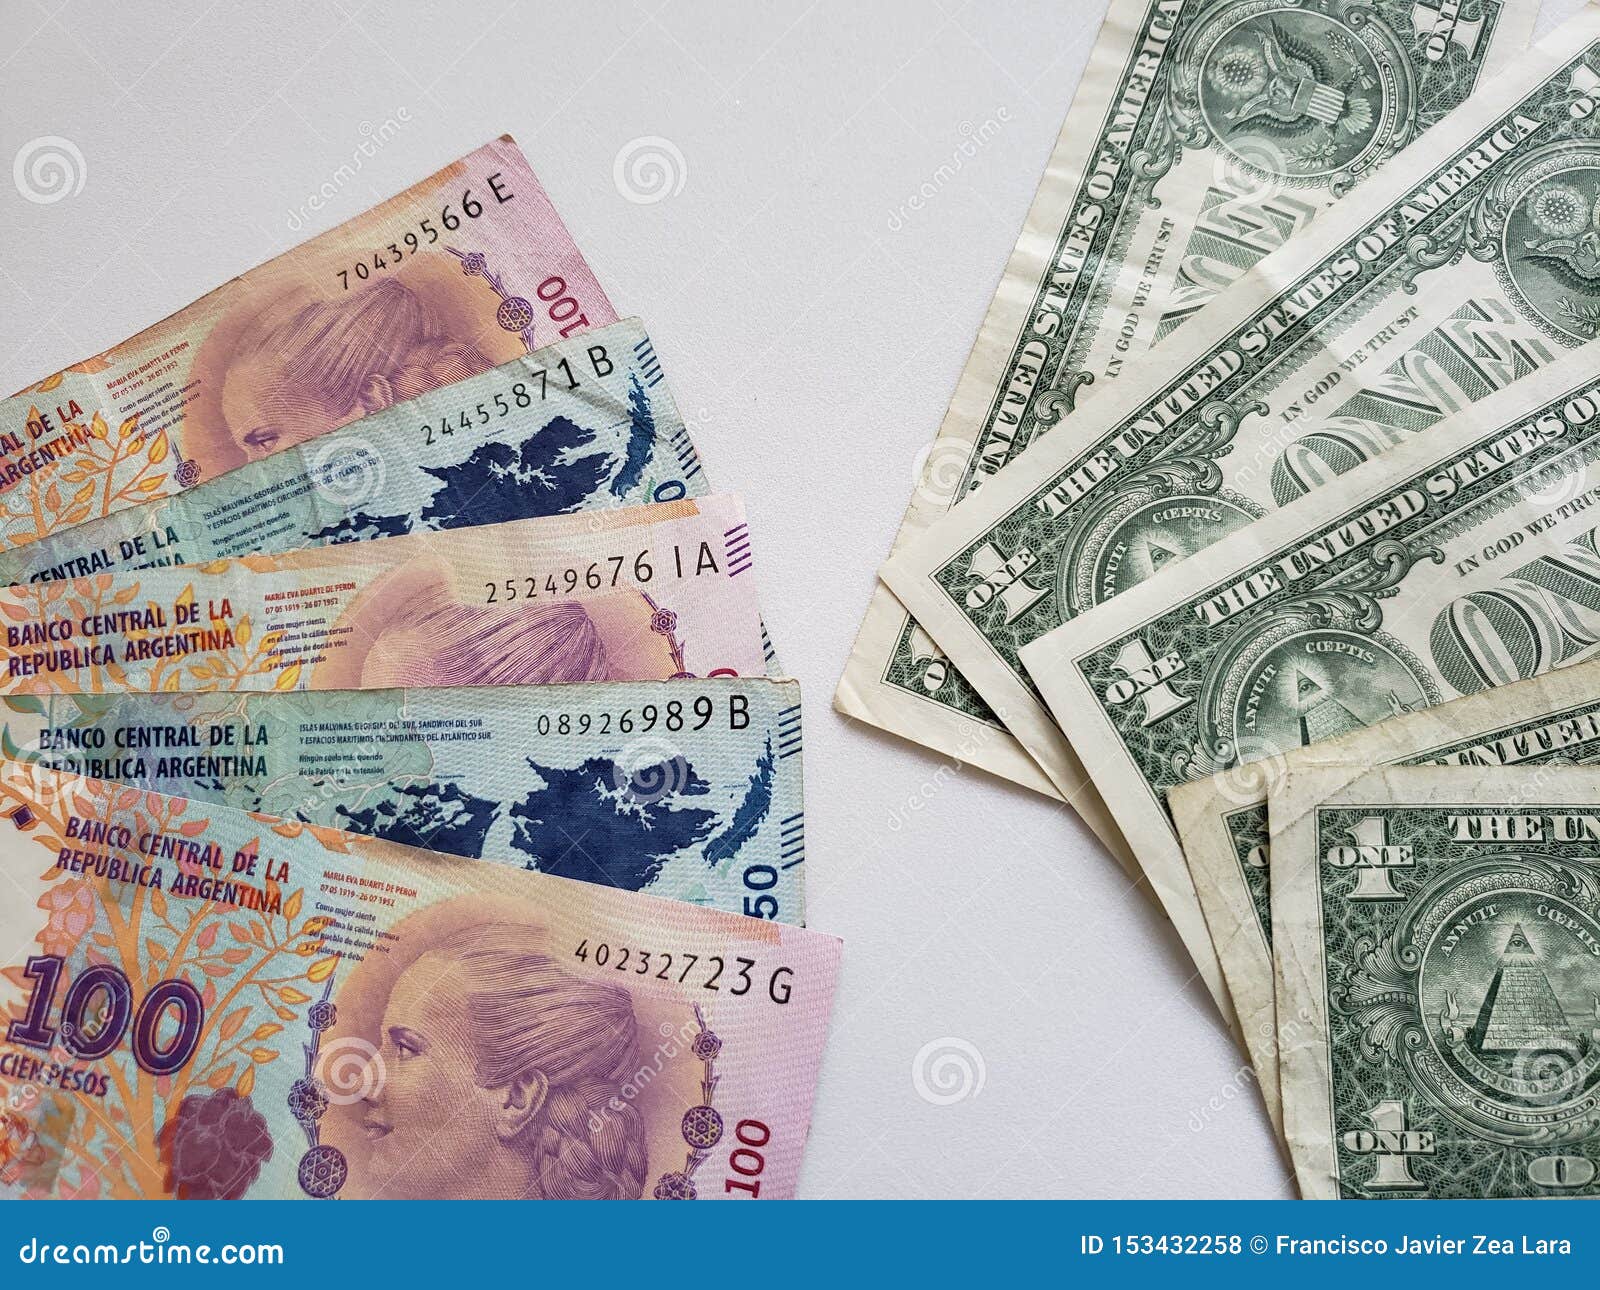 argentinean banknotes and american one dollar bills